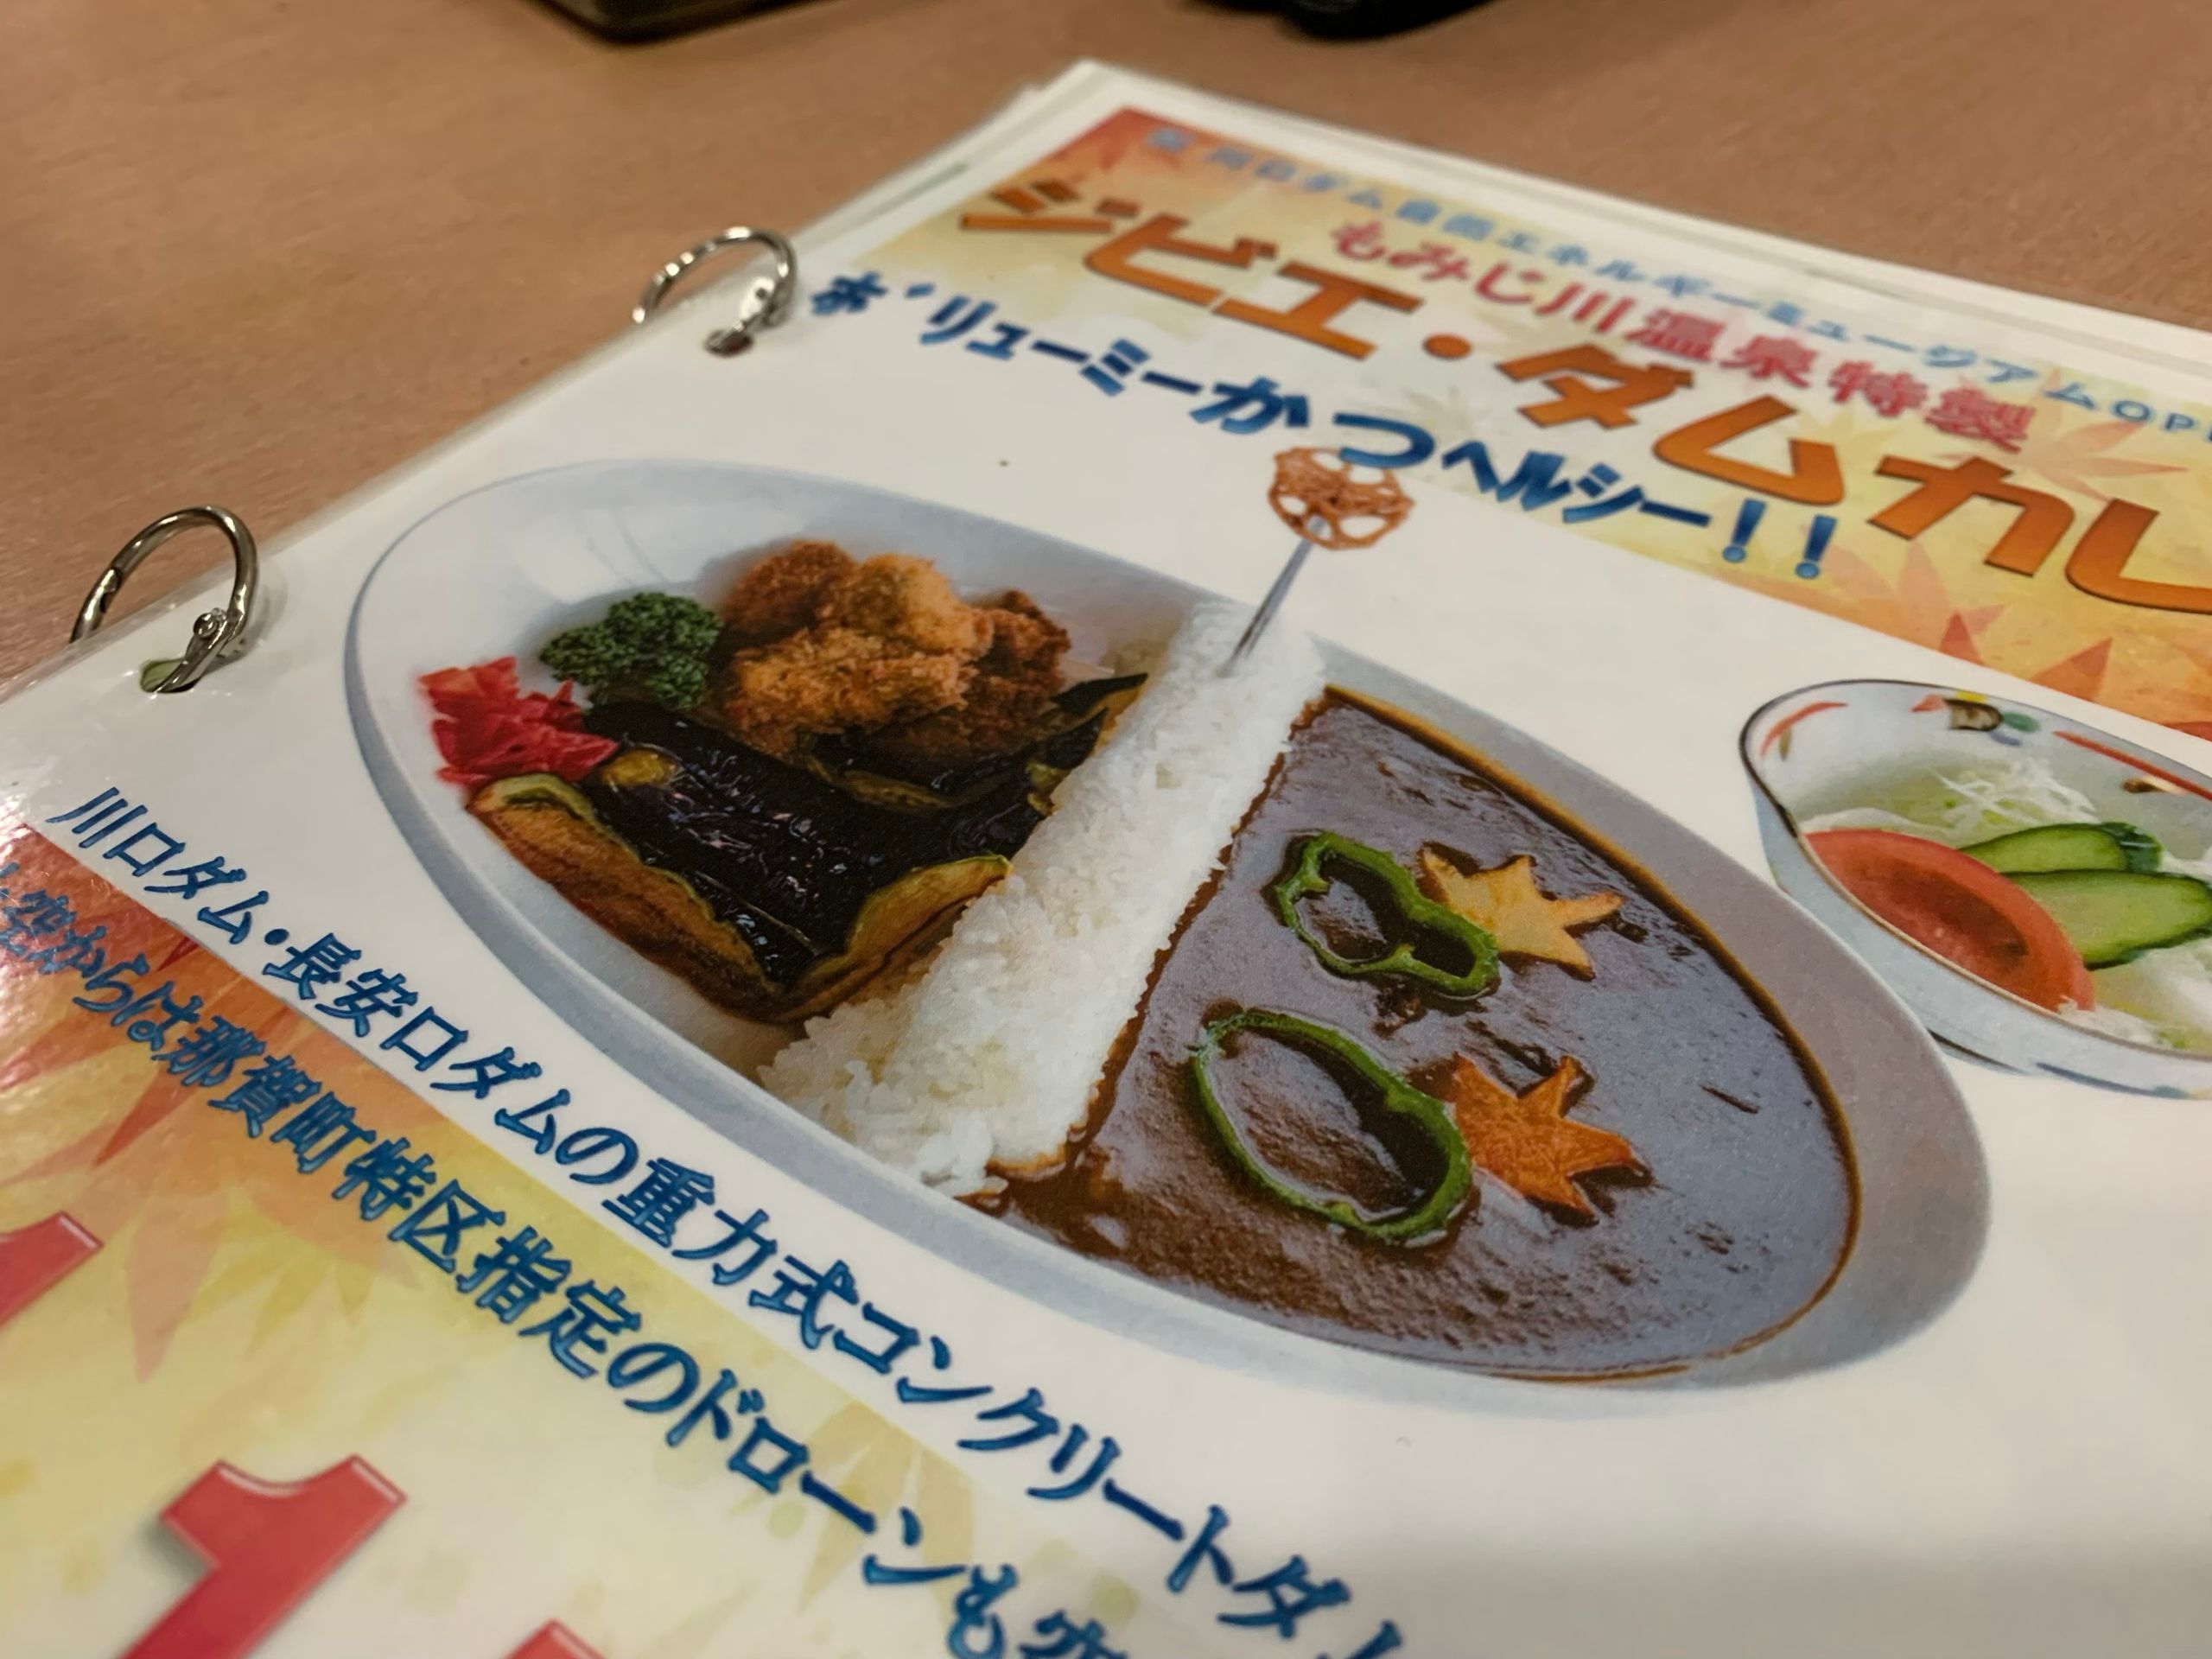 A menu in a restaurant shows a bowl of Japanese curry plated to resemble a dammed lake.